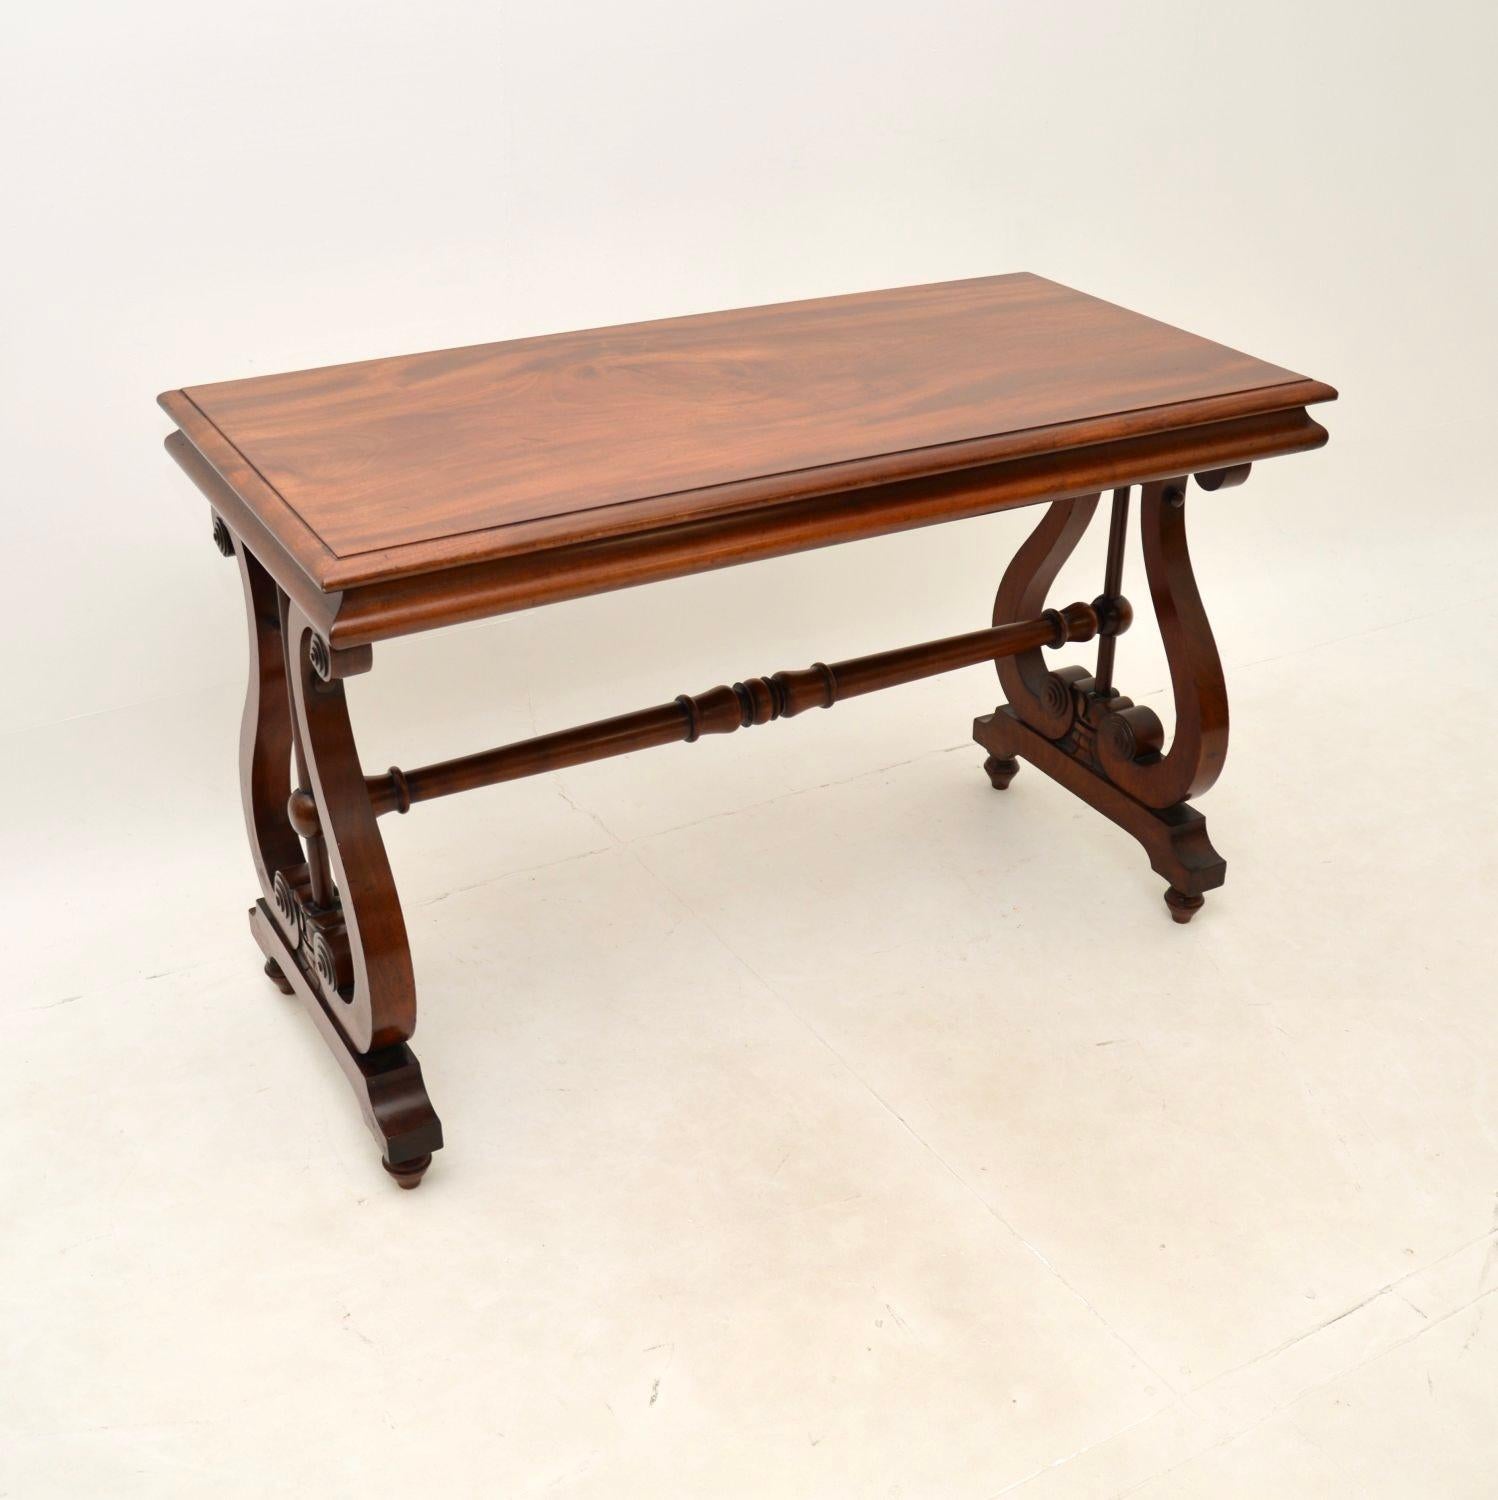 A fantastic antique Regency library table / desk. This was made in England, it dates from around the 1820-1840 period.

It is of extremely fine quality and is a very useful size. The rectangular top has beautifully moulded edges, it sits on a